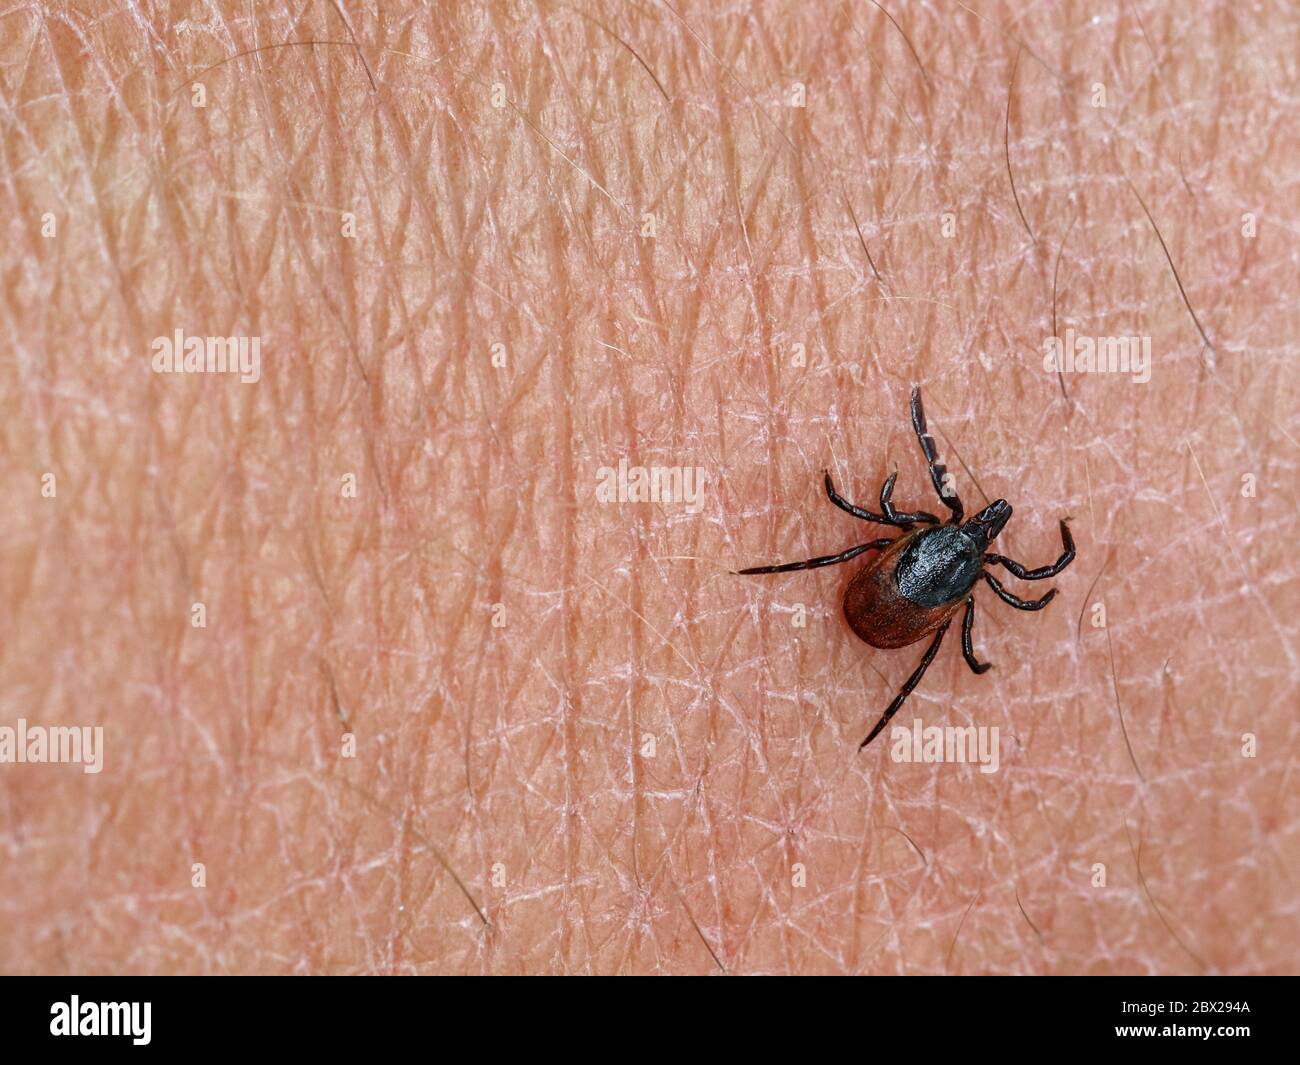 deer tick, ixodes ricinus, on human skin background with copy space Stock Photo